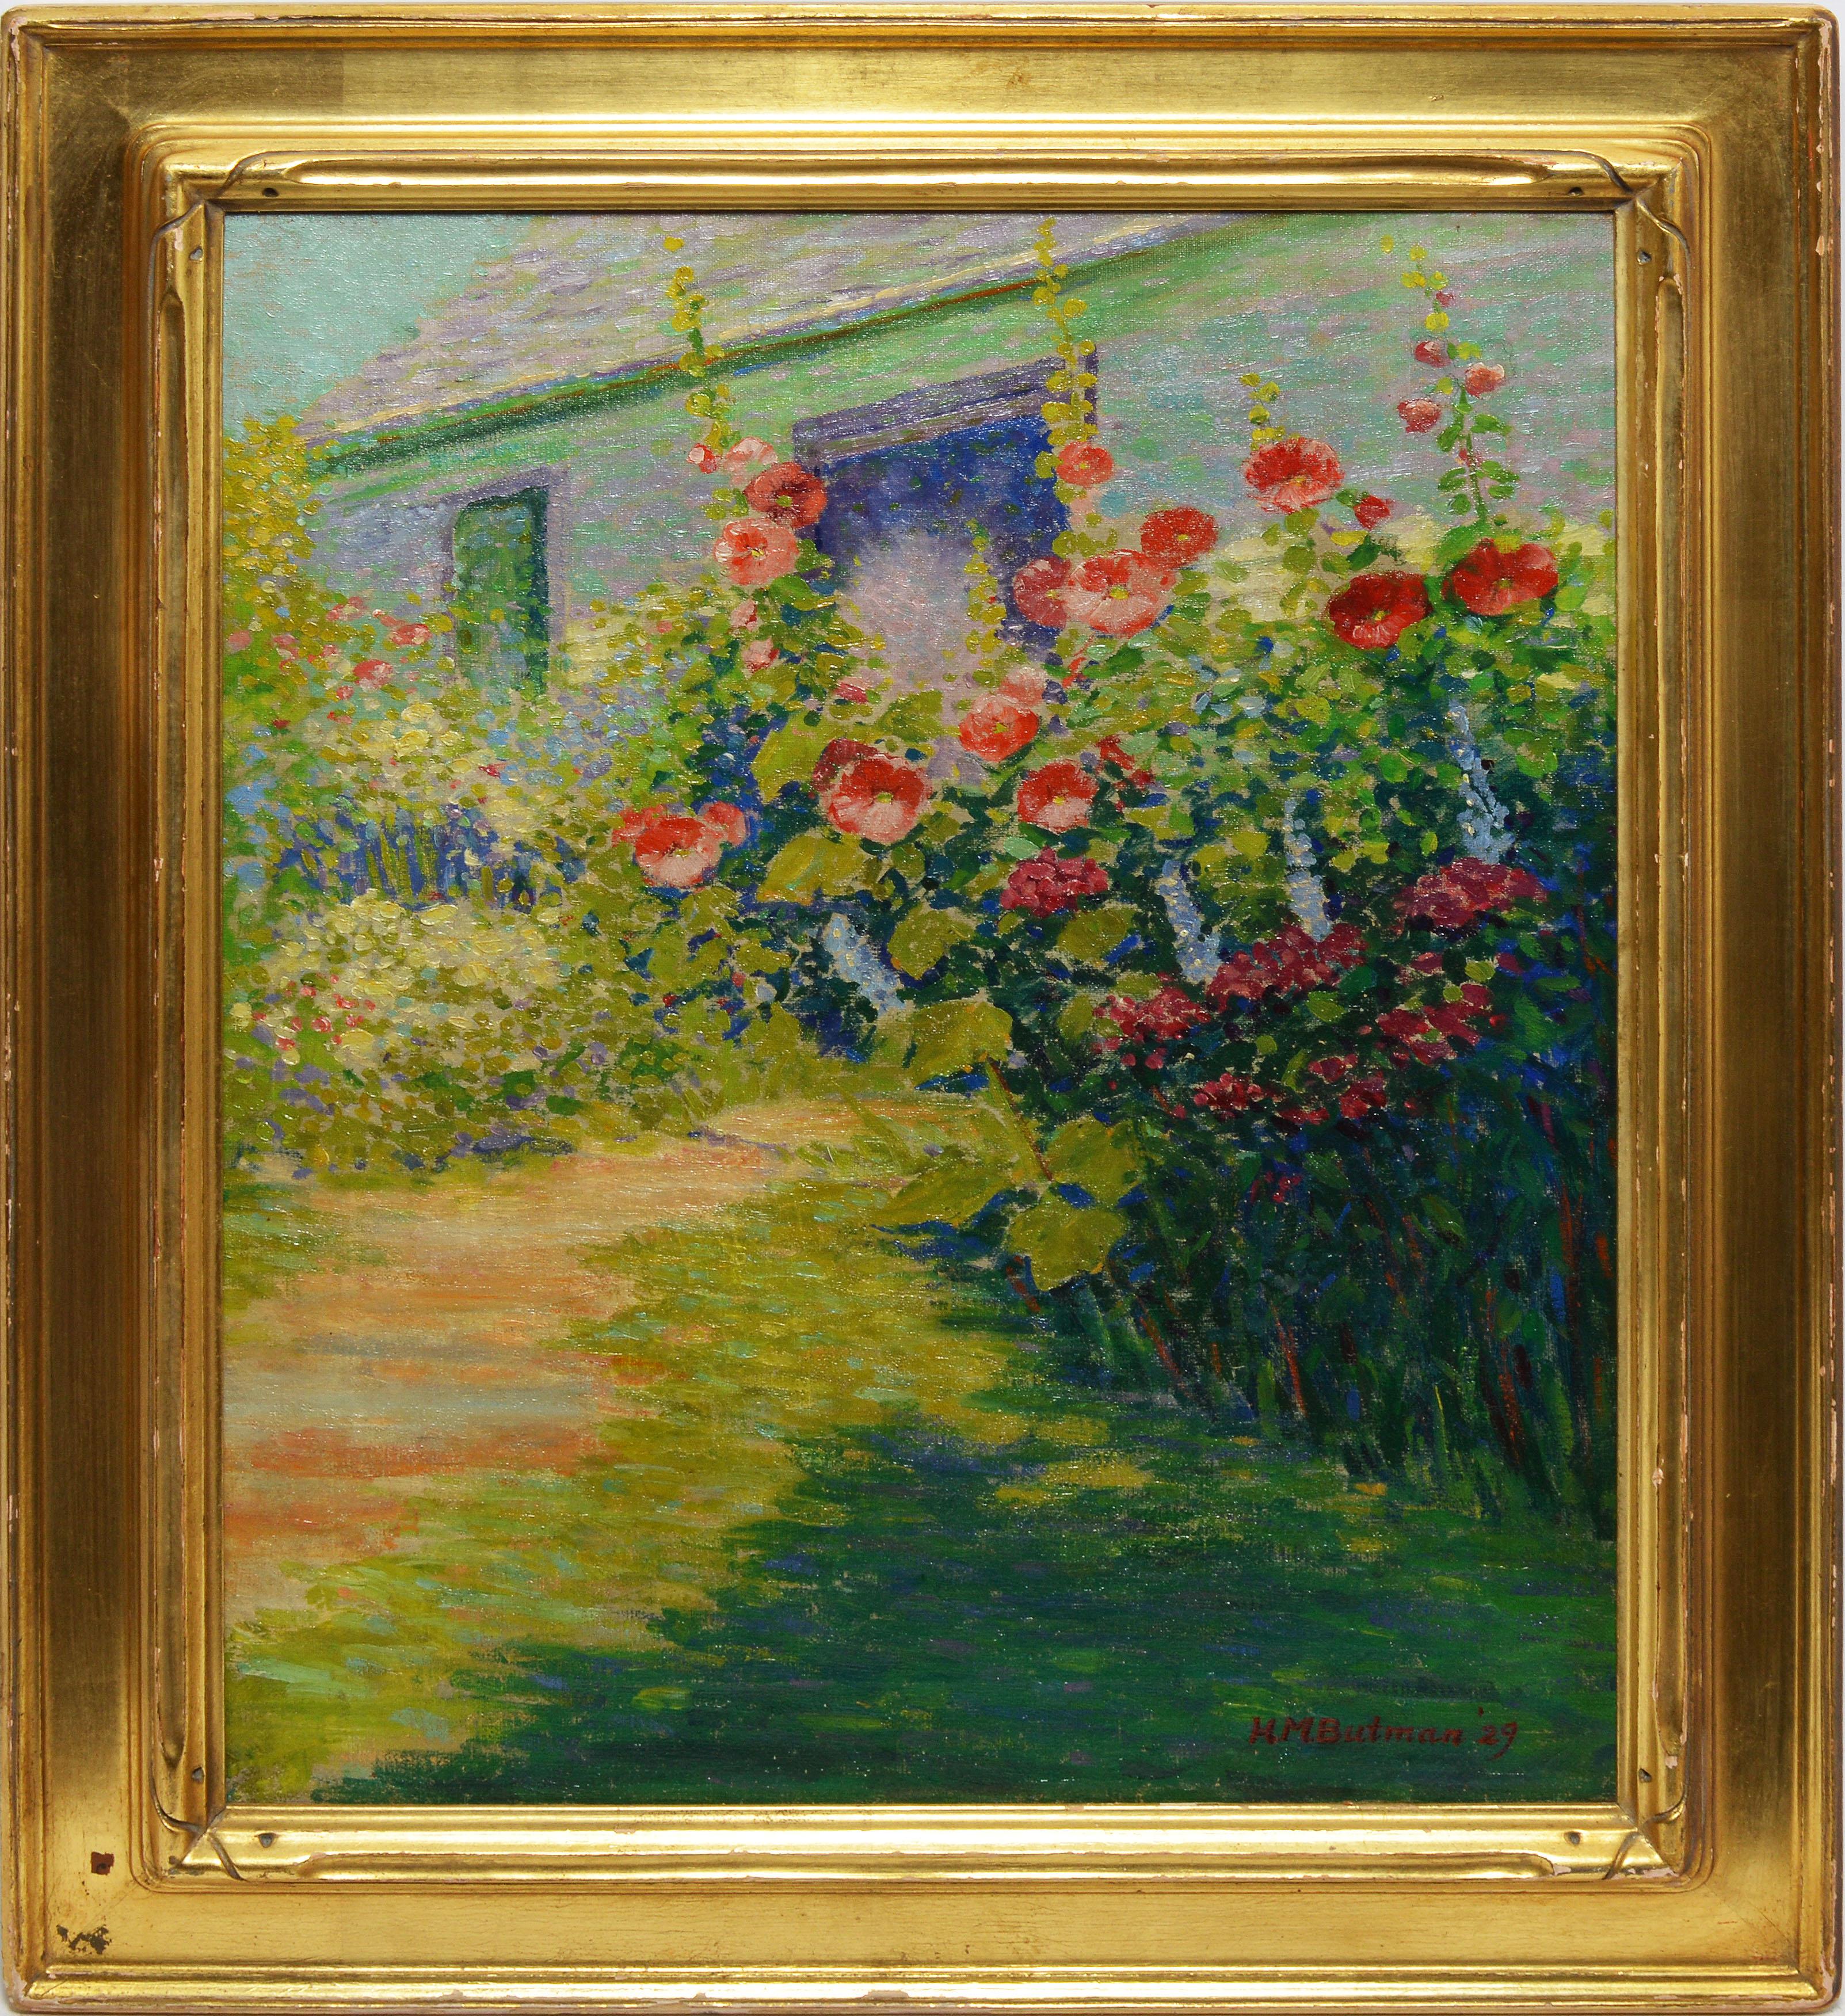 Impressionist flower landscape by Helen Butman  (- 1960).  Oil on canvas, circa 1929.  Signed lower right.  Displayed in a period giltwood frame.  Image size, 16"L x 20"H, overall 21"L x 25"H.